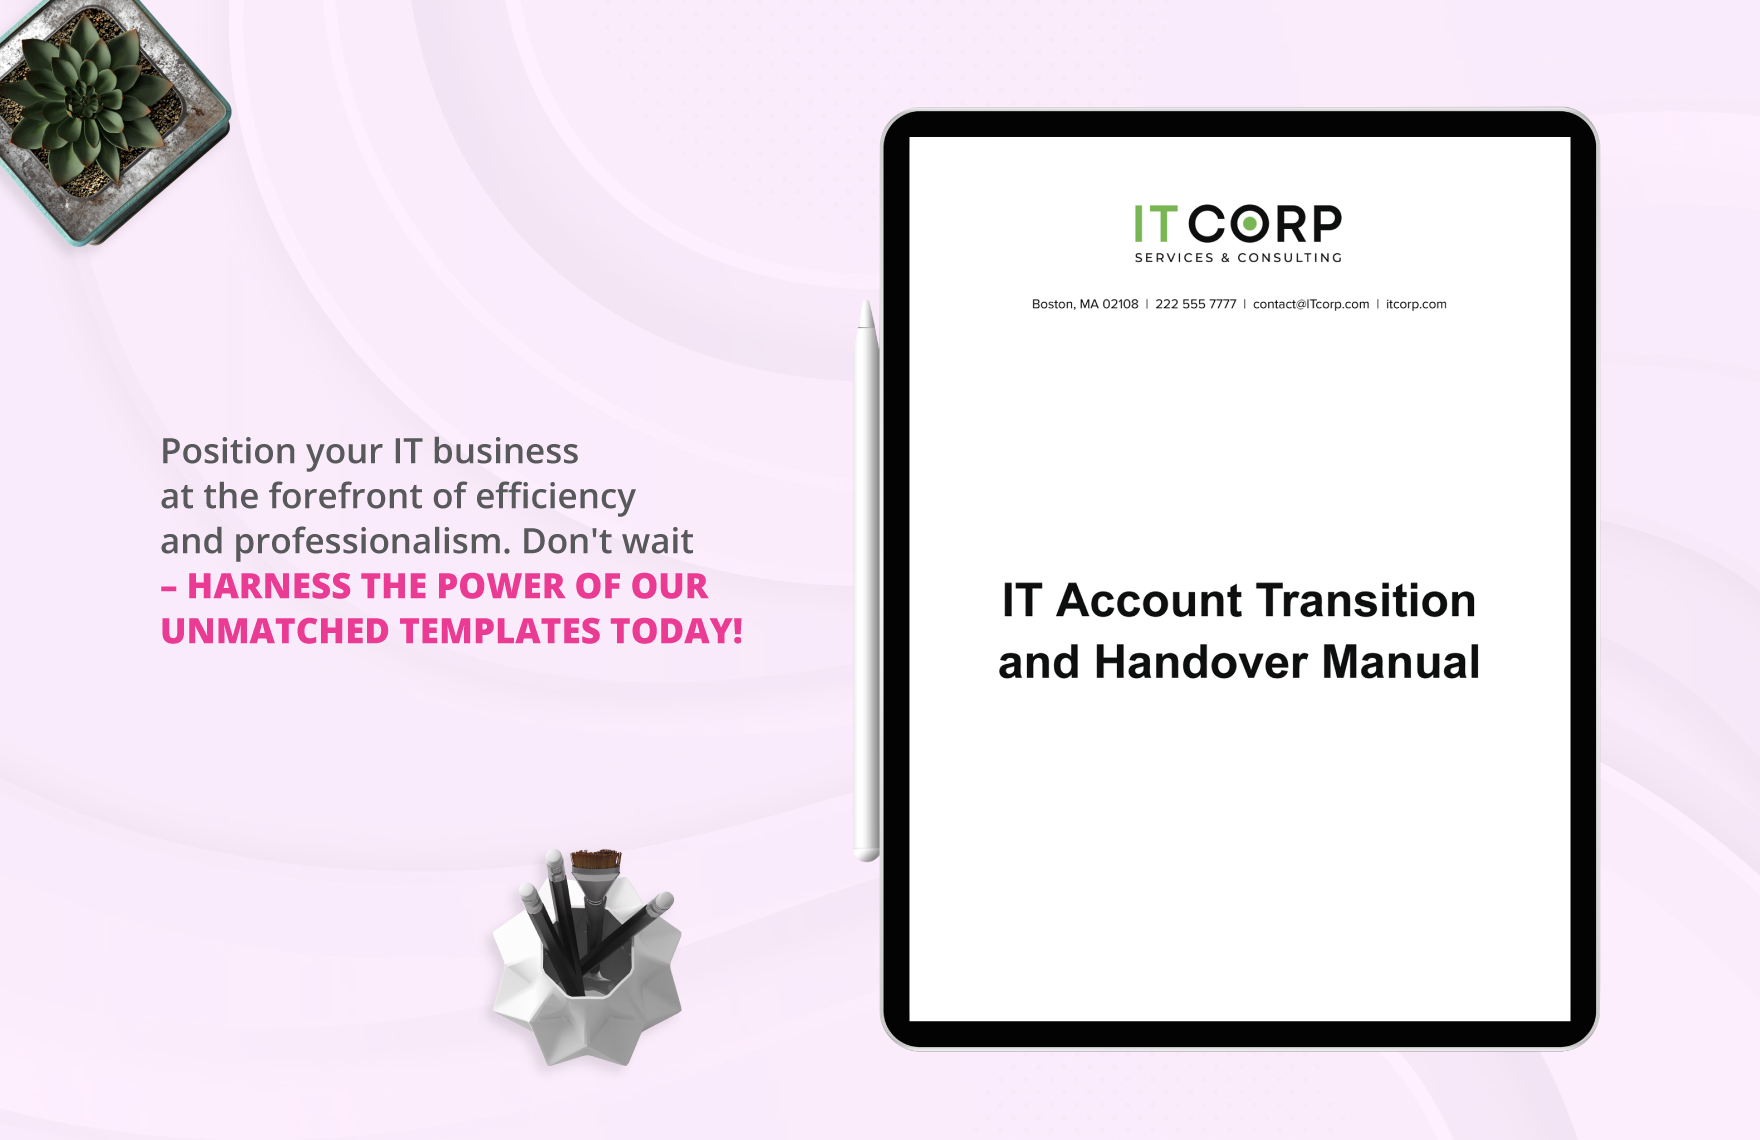 IT Account Transition and Handover Manual Template